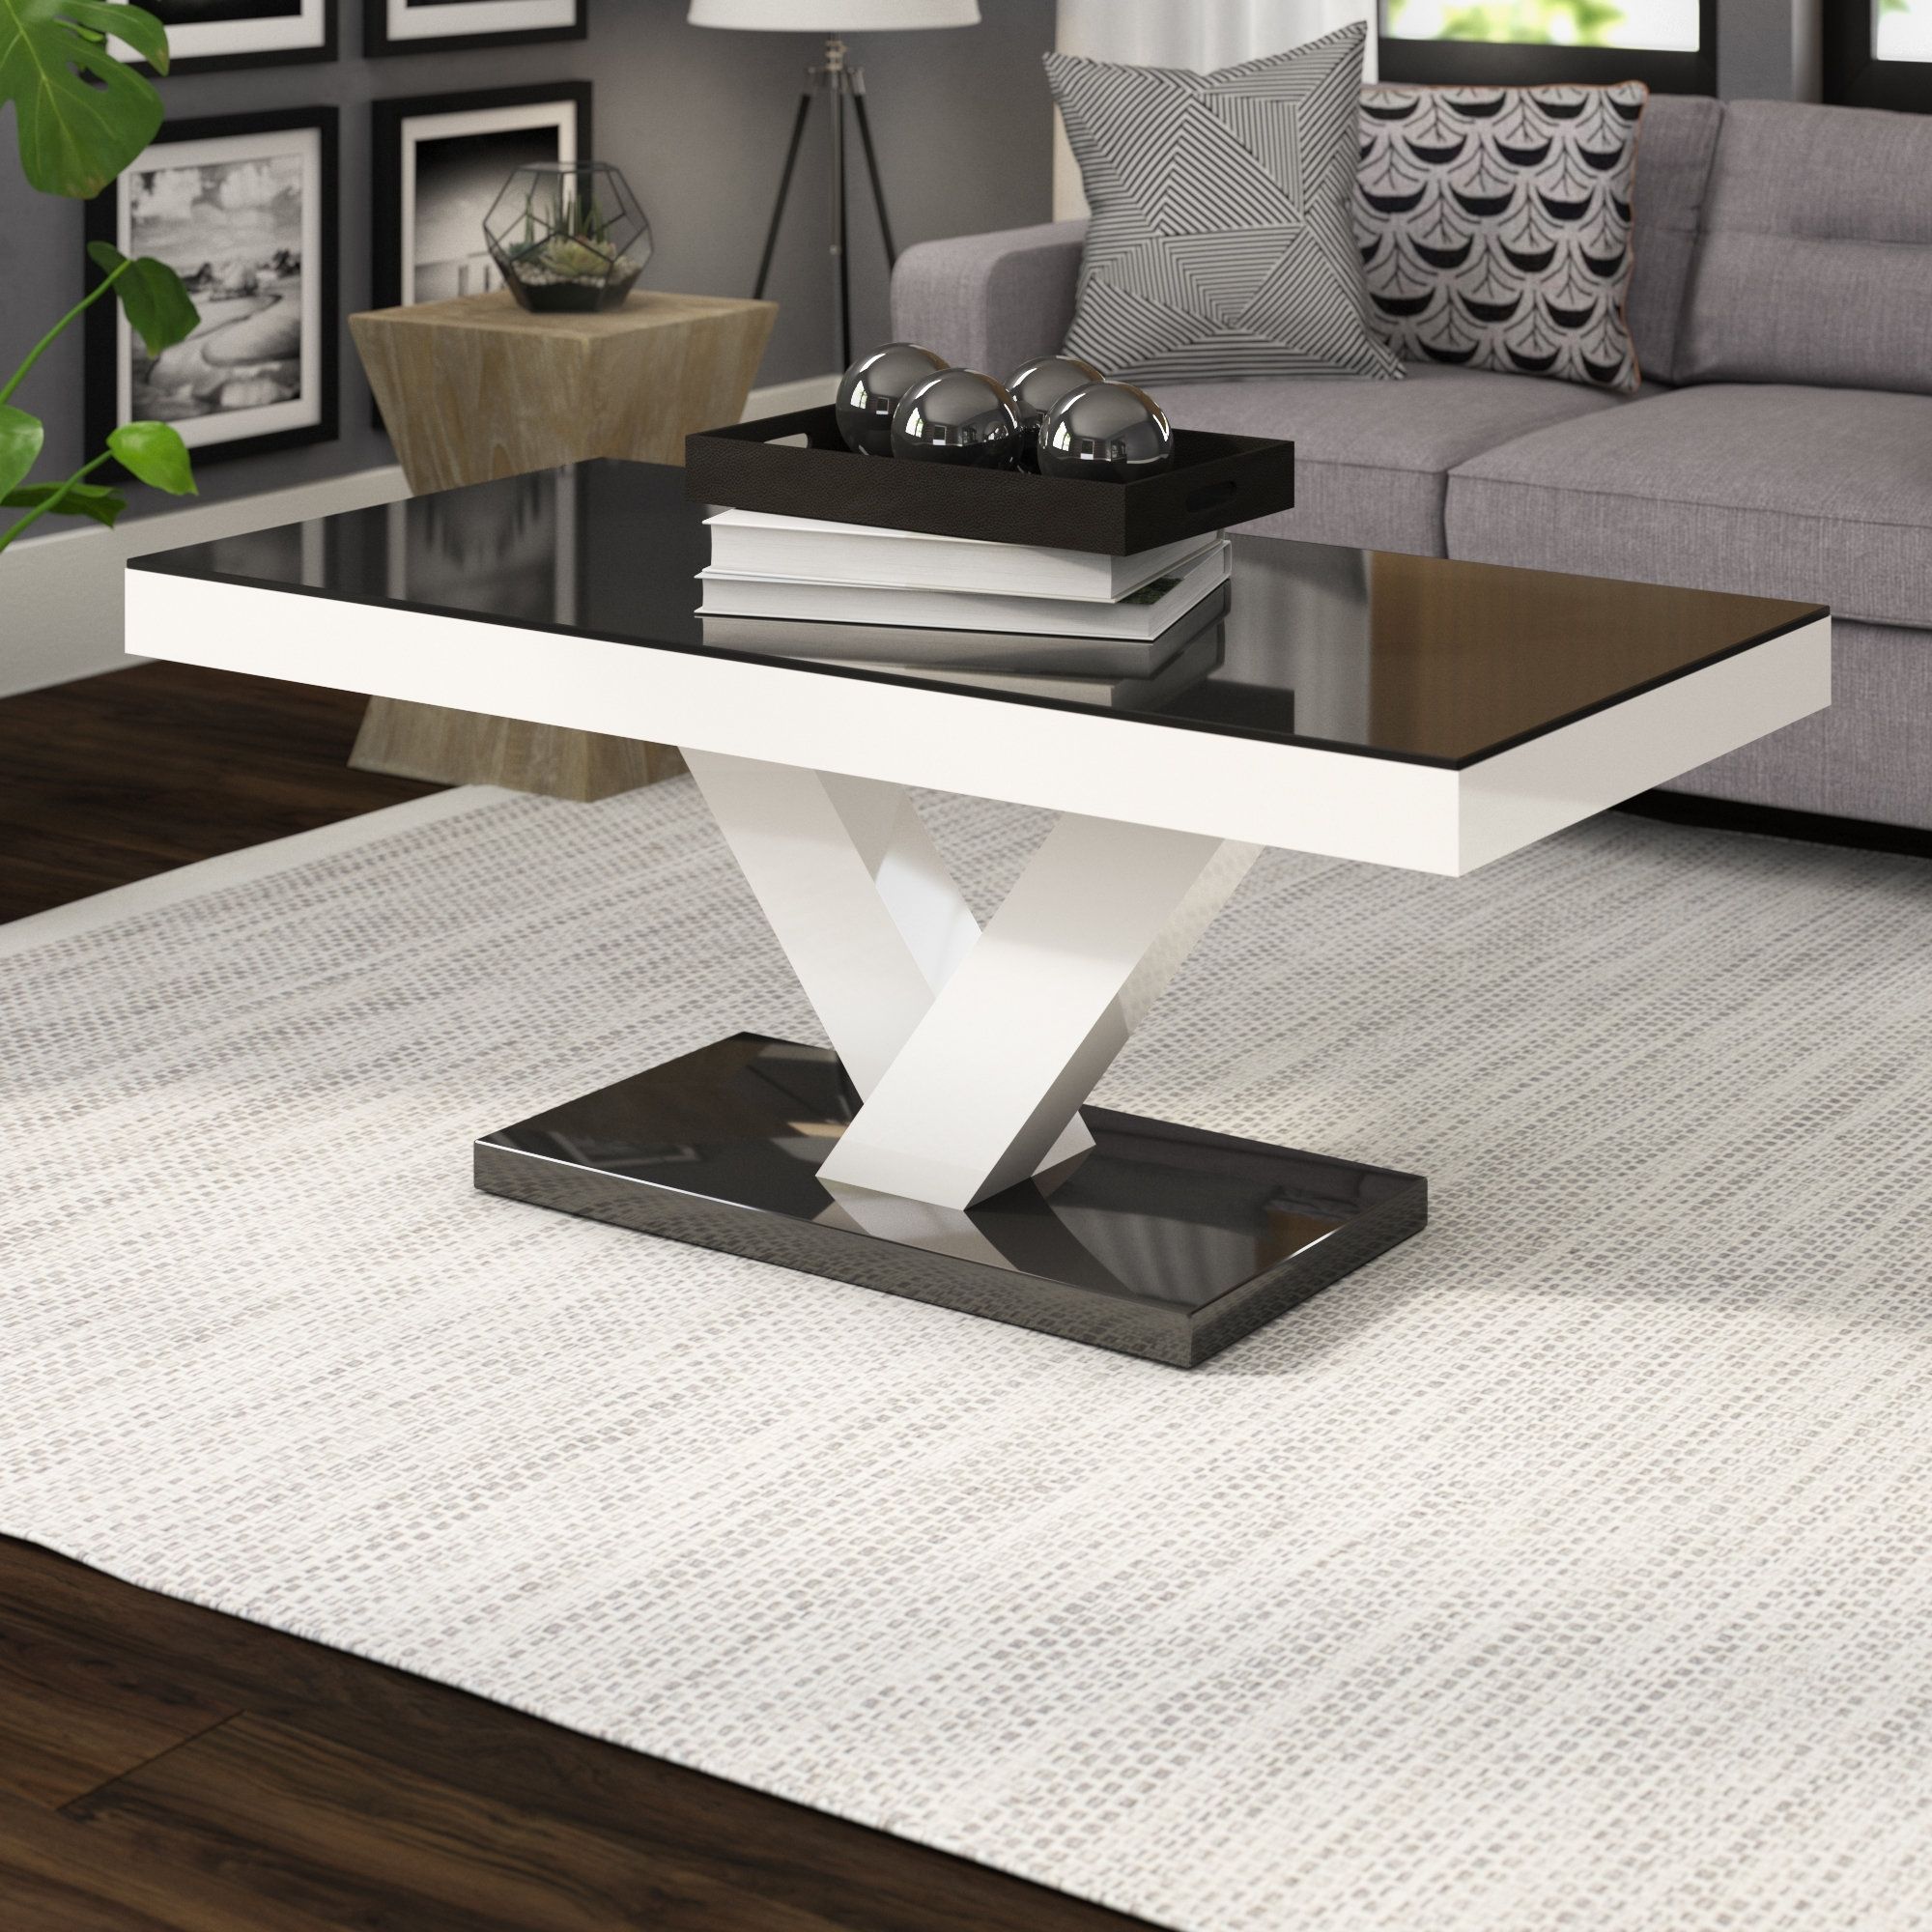 Wade Logan Thurmont Cross Legs Coffee Table & Reviews | Wayfair Intended For Stack Hi Gloss Wood Coffee Tables (View 9 of 30)